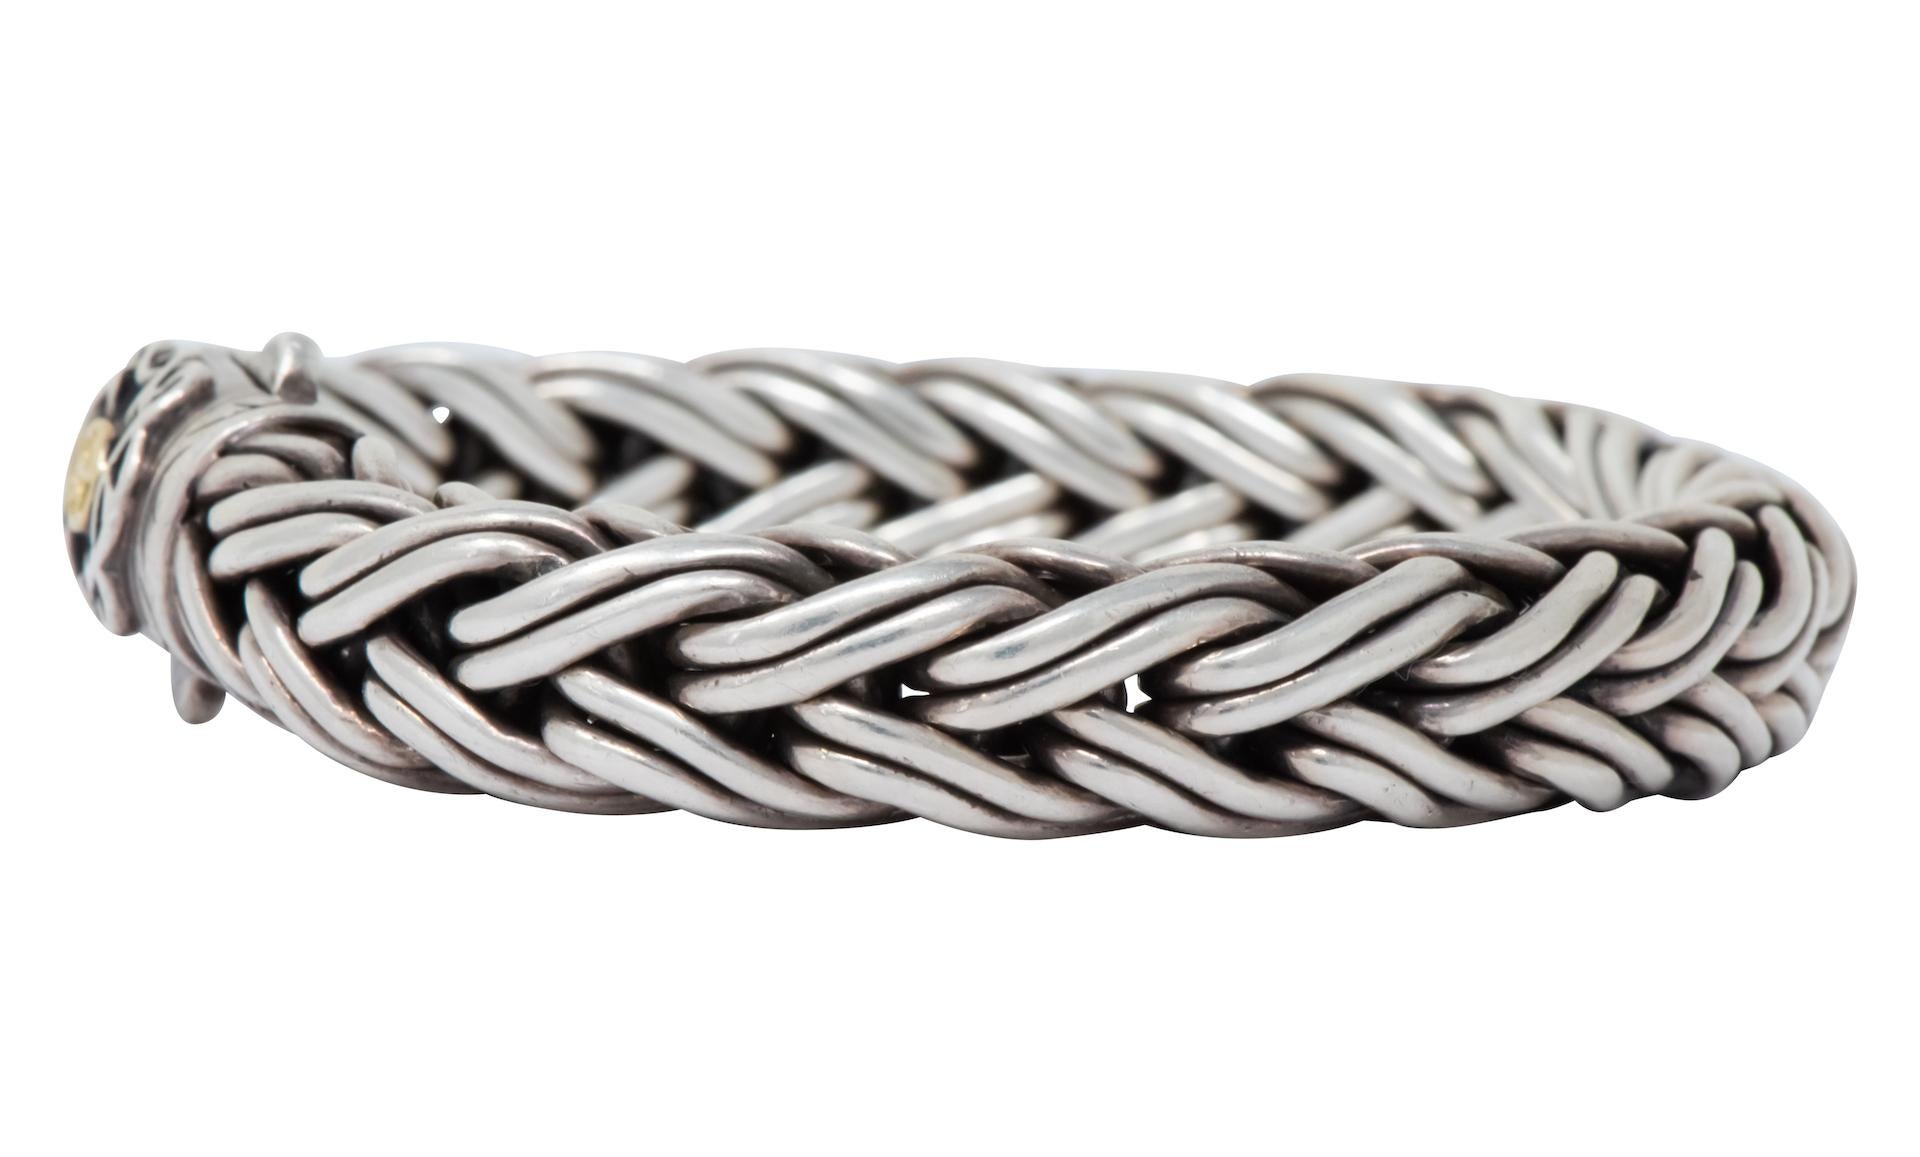 Thick woven sterling silver bracelet with thorn design on clasp

Completed by double presser clasp with applied gold maker's mark

From Scott Kay Doberman collection

Fully signed Scott Kay and stamped 750 and 925

Length: 8 1/2 inches

Width: 1/2